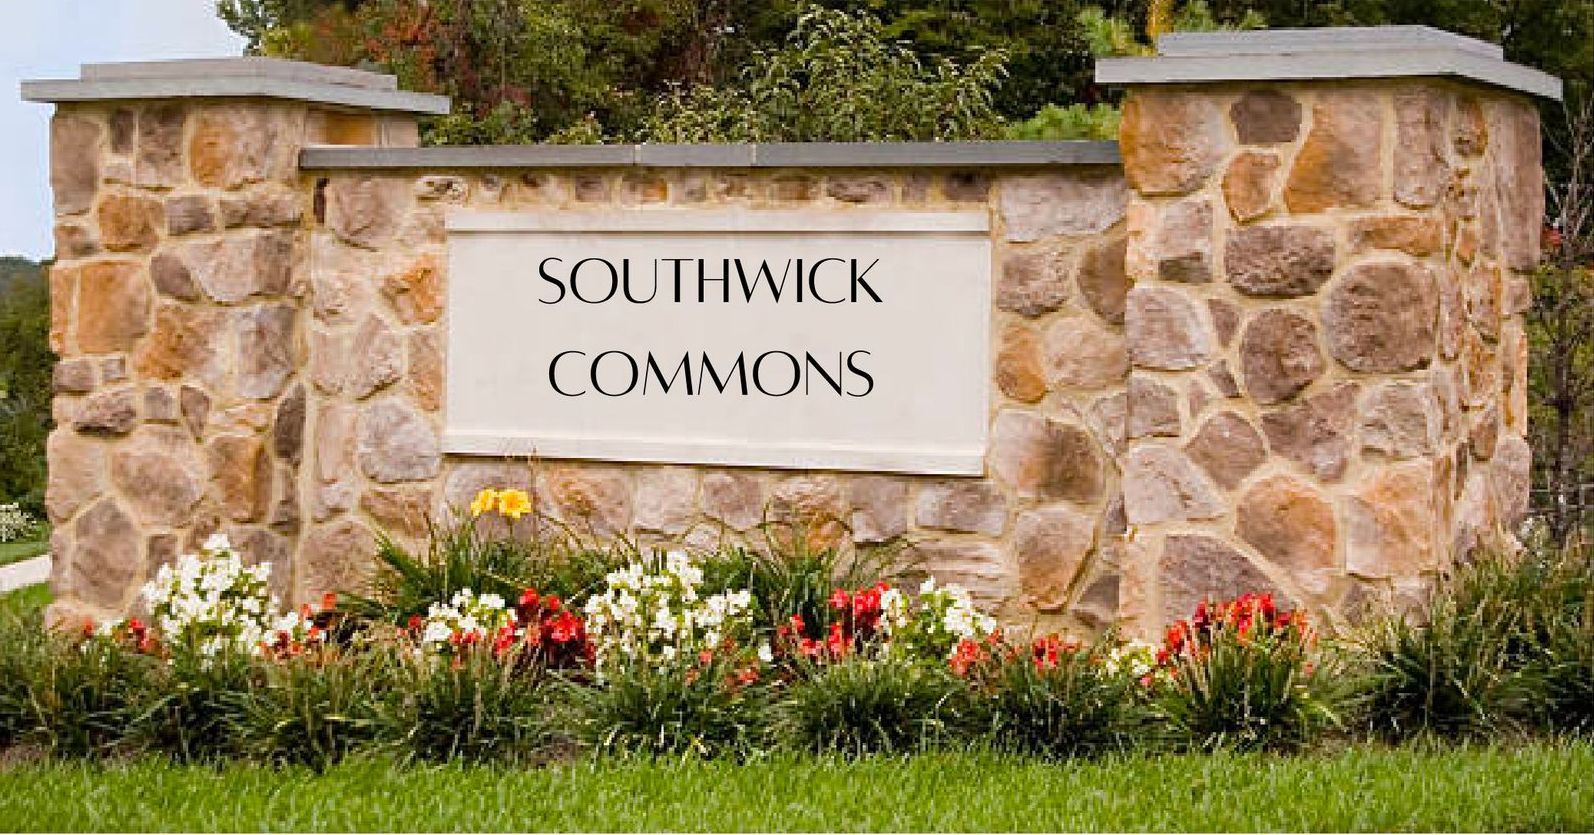 Southwick Commons sign